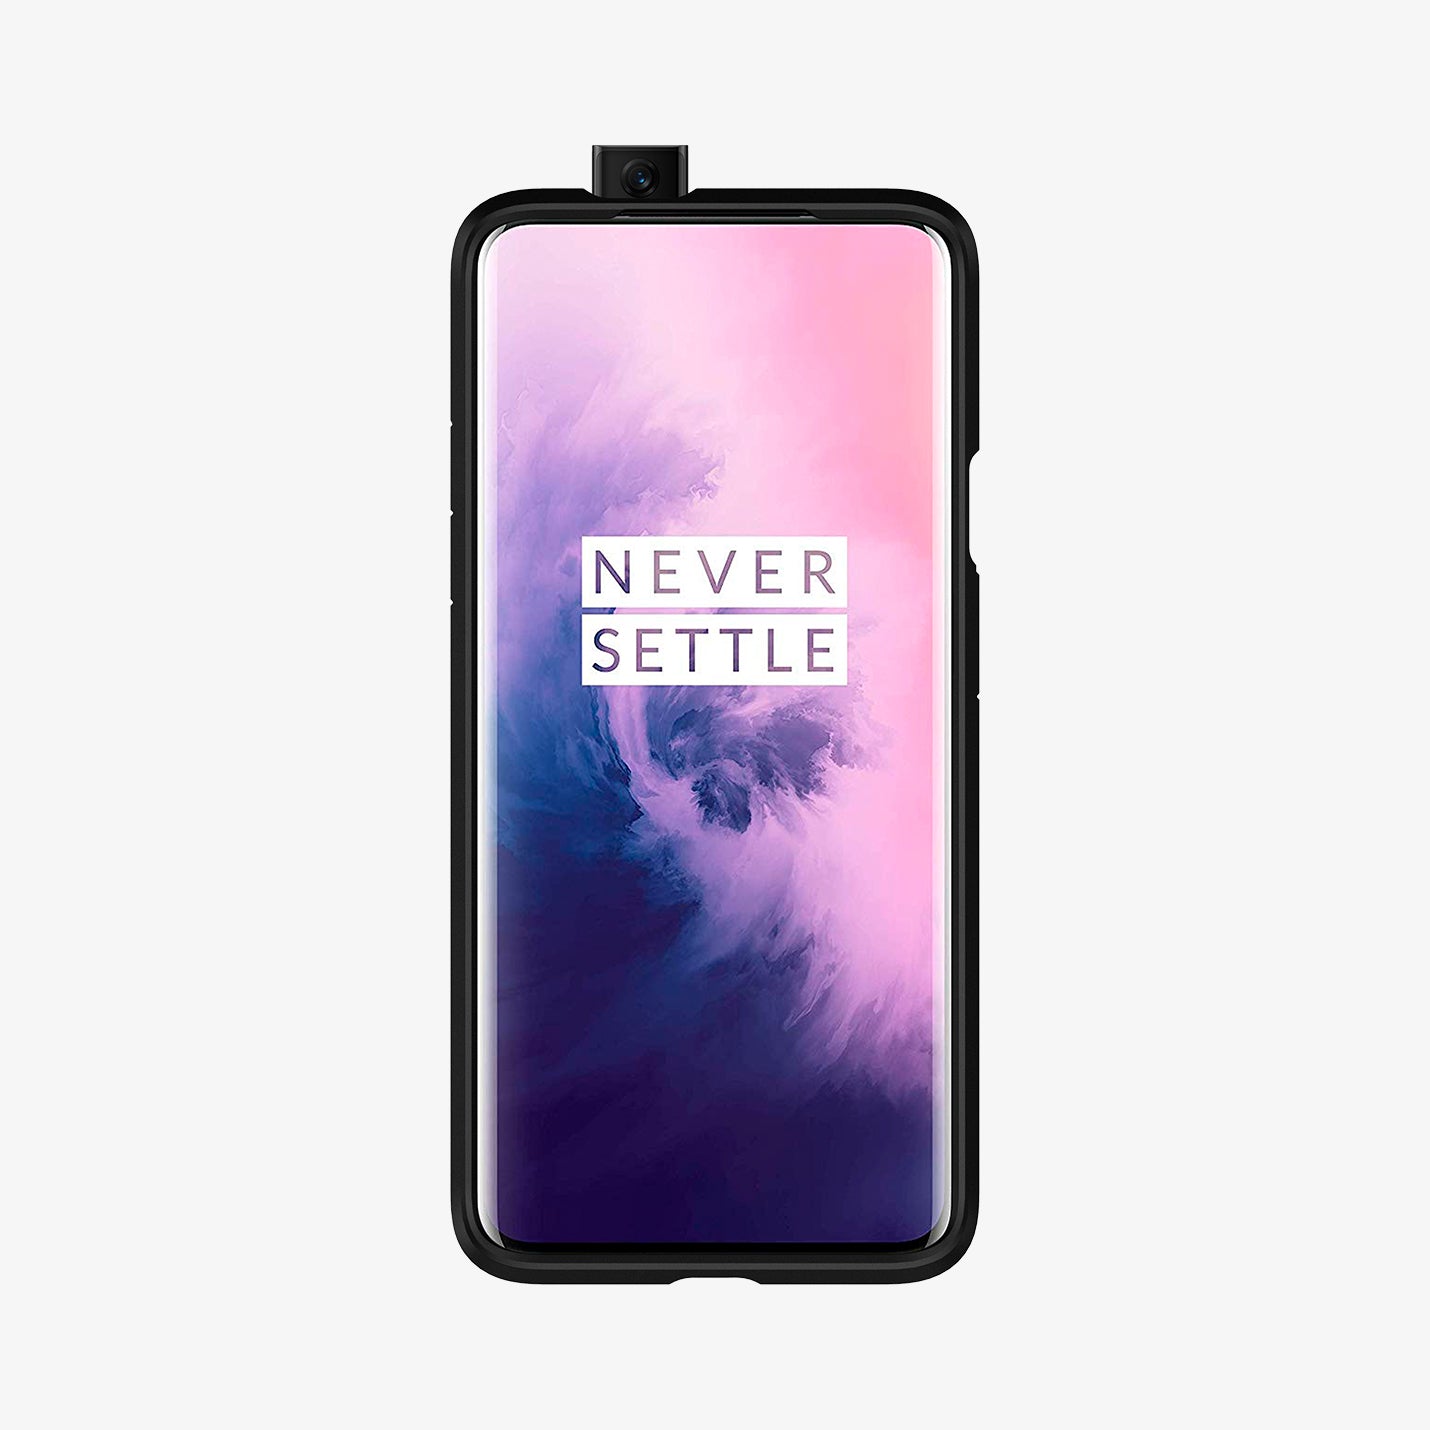 K09CS26485 - OnePlus 7 Pro Tough Armor Case in Black showing the front